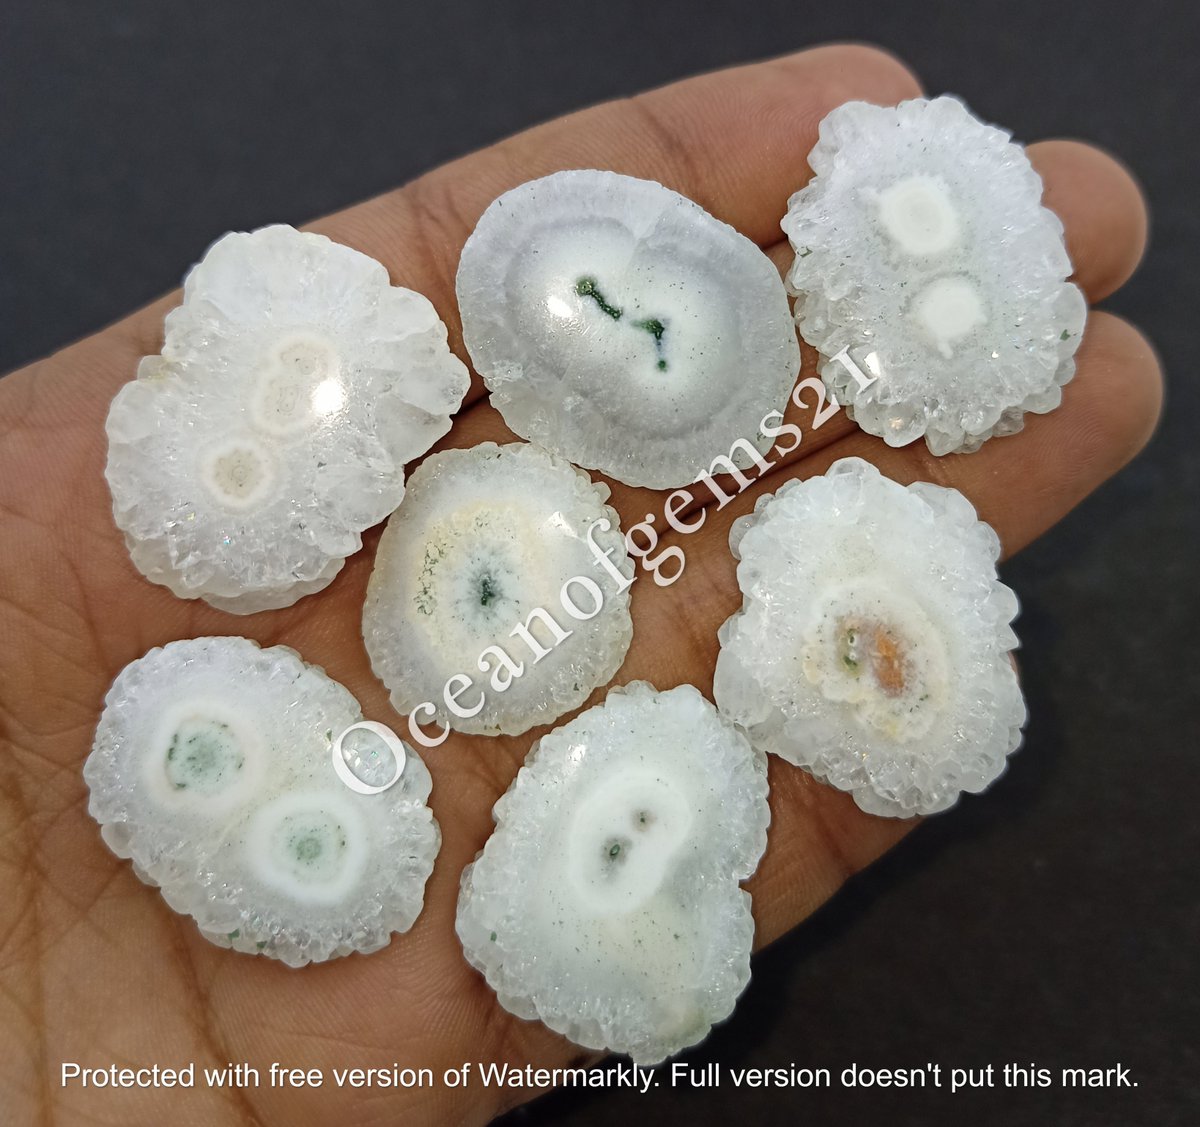 Natural White Solar Quartz Druzy Gemstone Cabochon Dm For Price Size 25 to 40mm Approx Free Drilling Service Worldwide Shipping$6 Combined Shipping Available #whitesolarquartz #solarquartz #whitesolar #quartz #quartzstone #Solarstone #solargemstone #whitesolarquartzcabochon